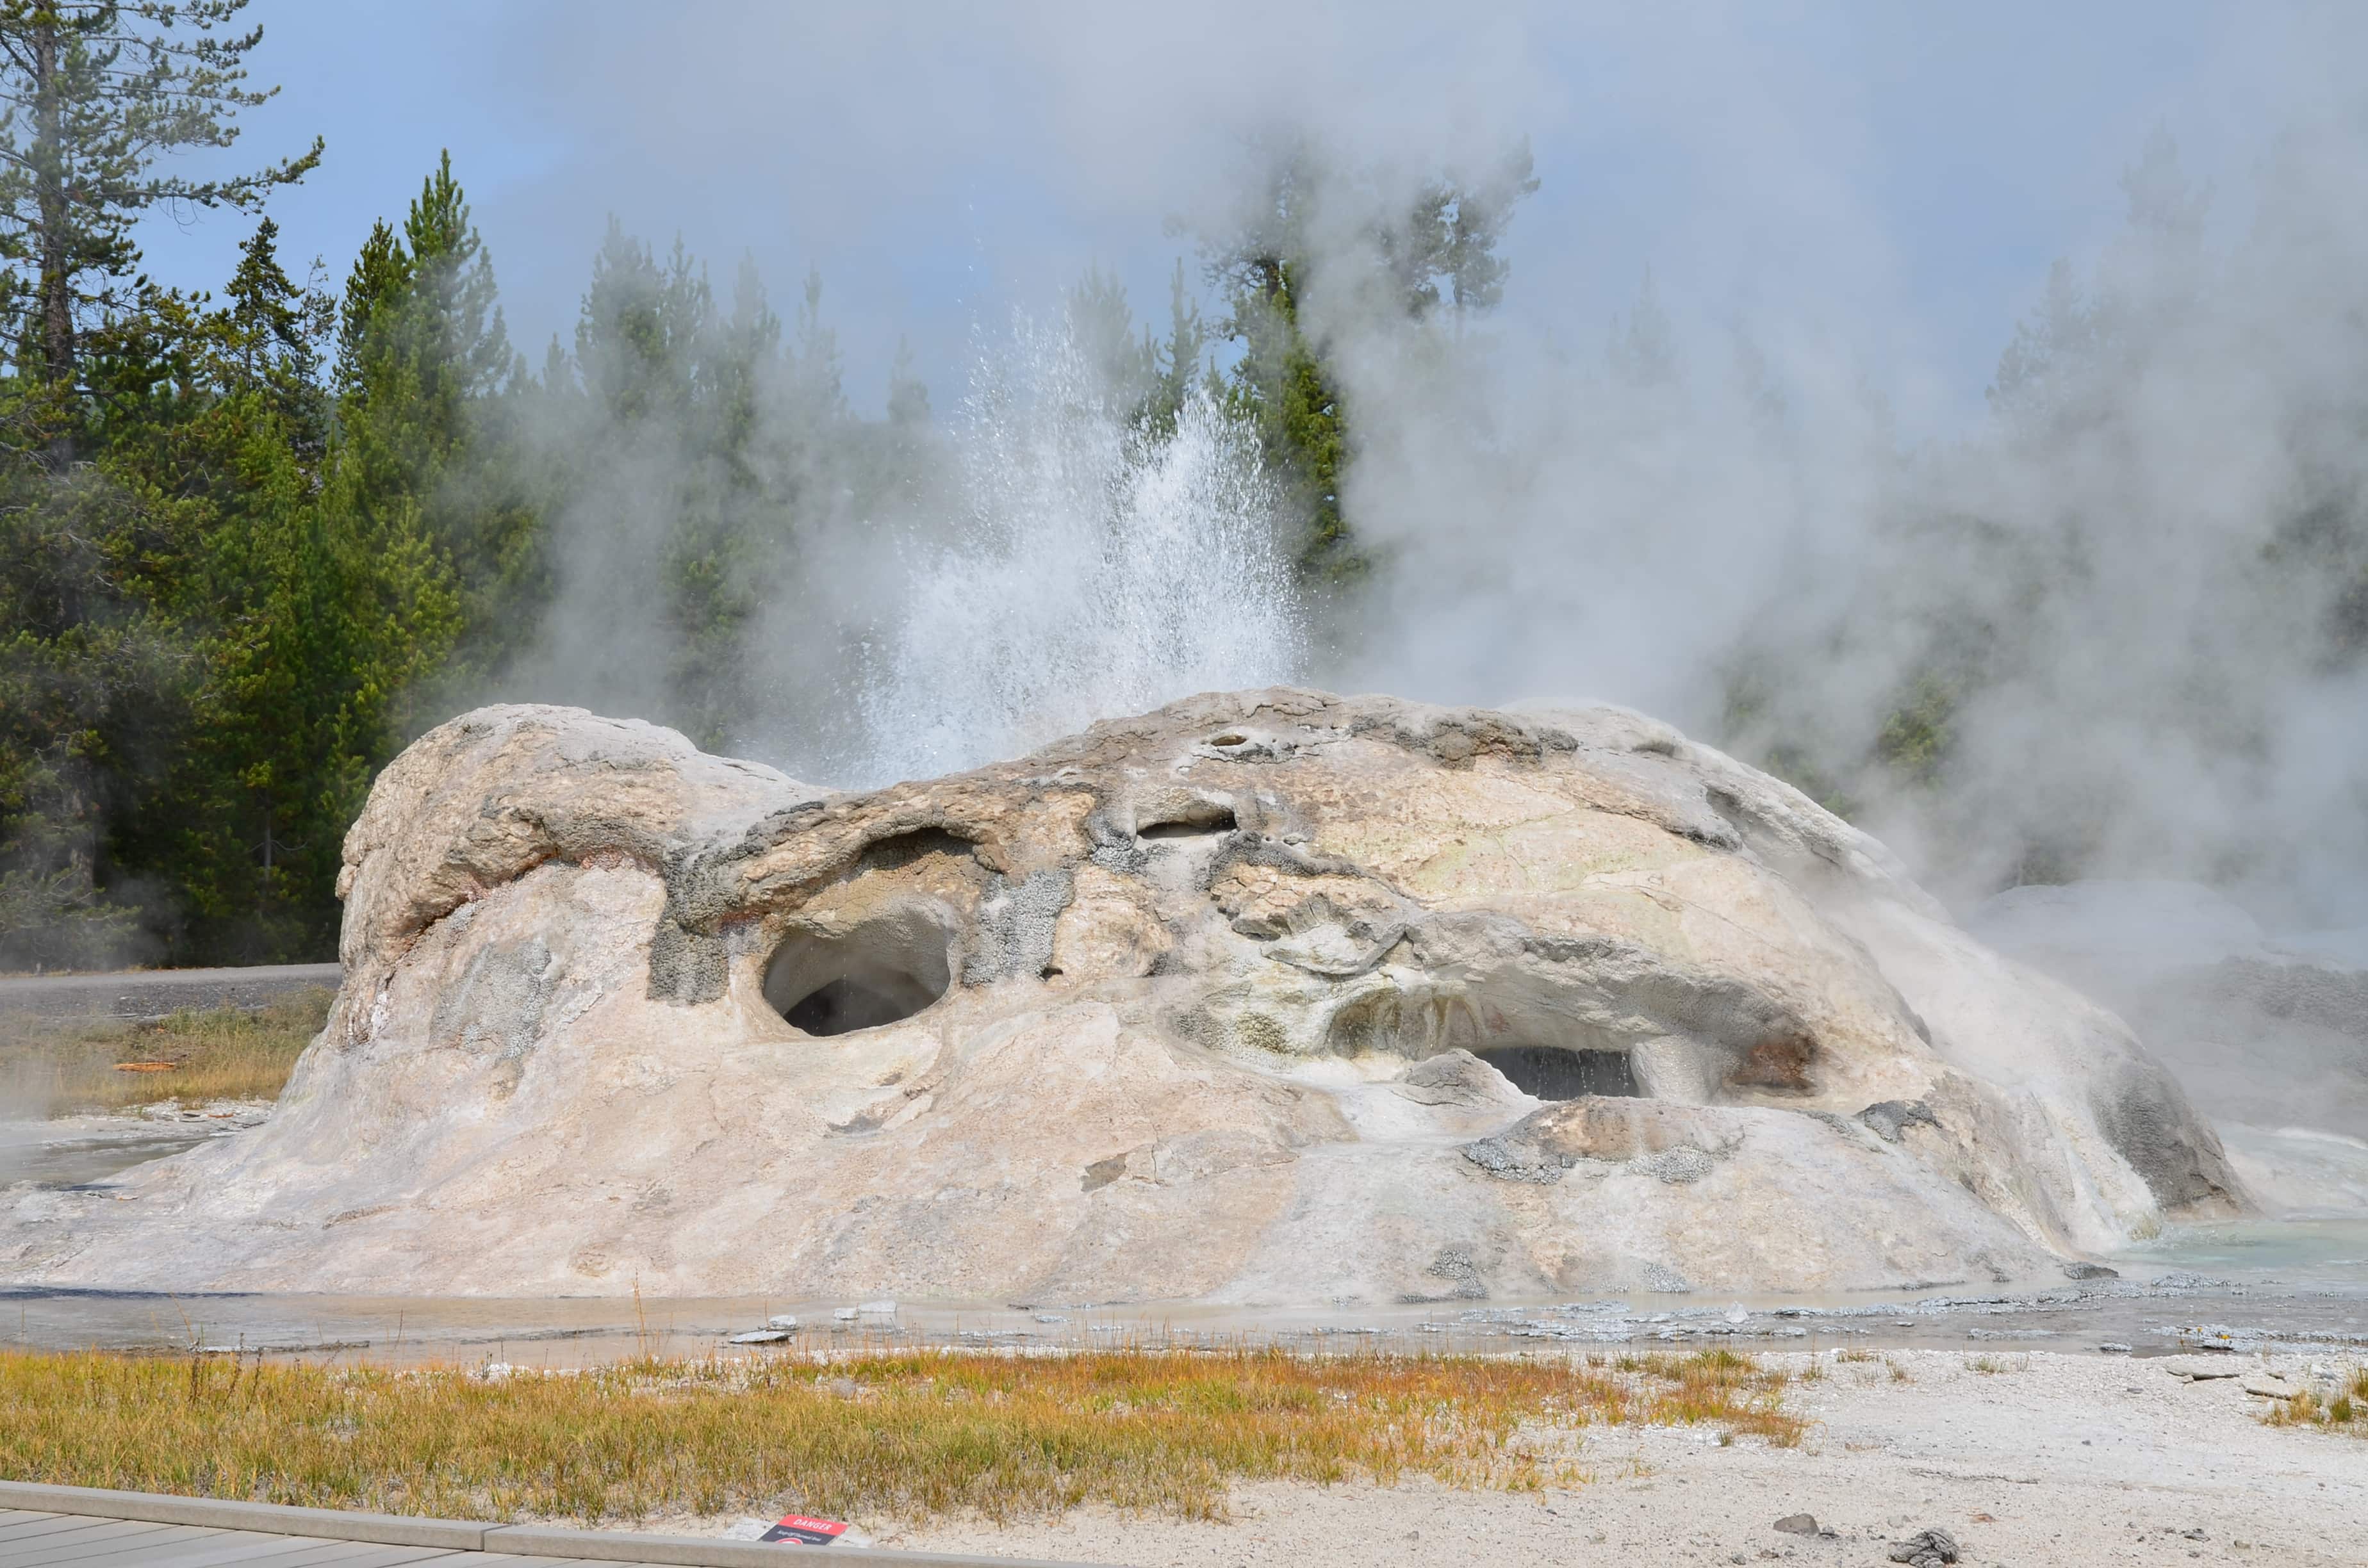 Grotto Geyser at the Upper Geyser Basin in Yellowstone National Park, Wyoming